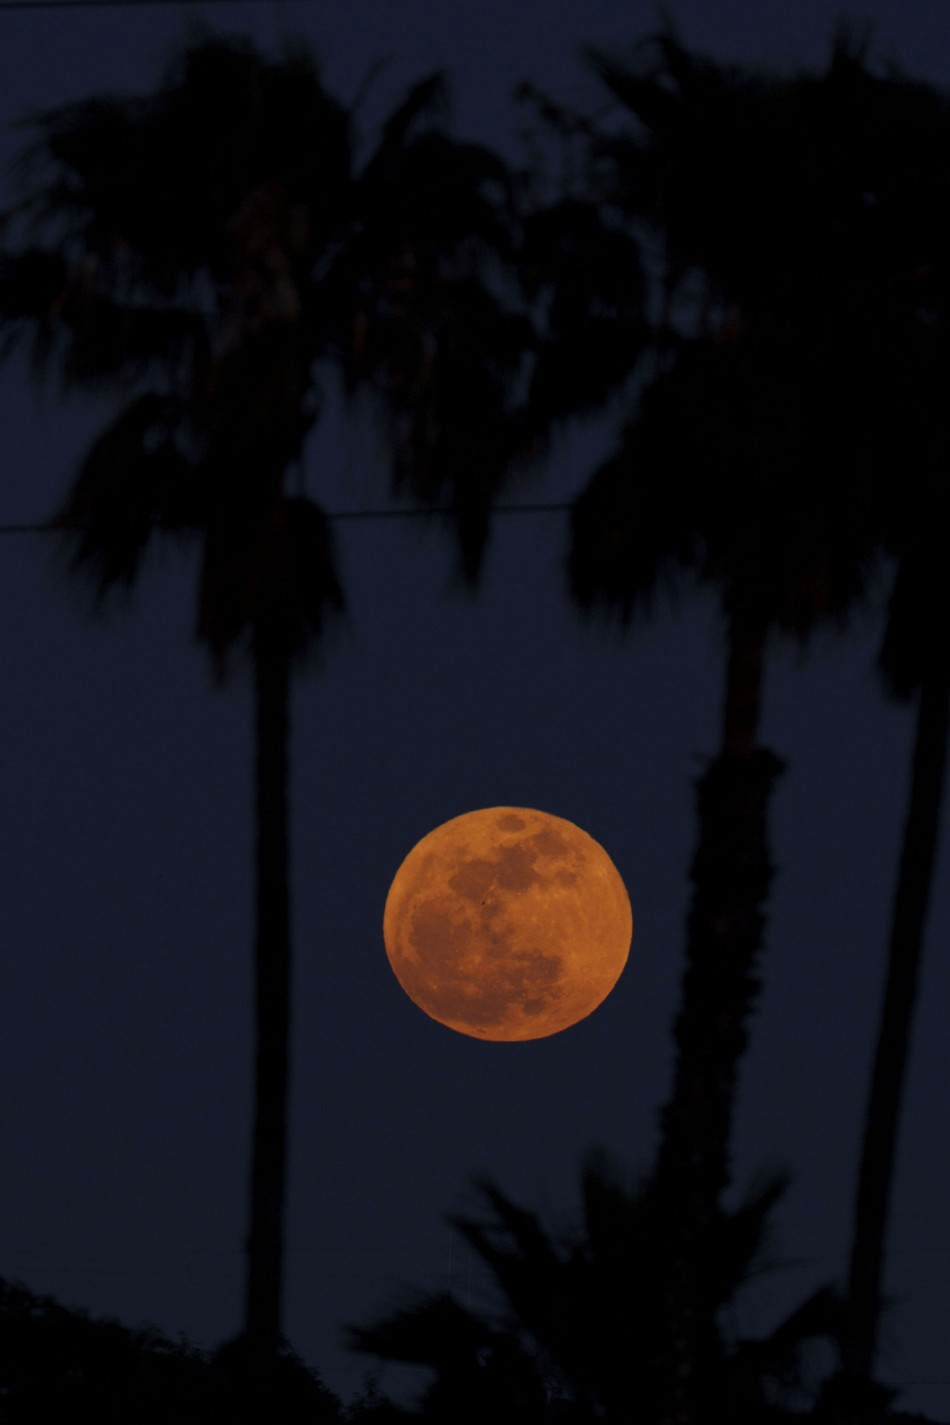 The Super Moon rises in Inglewood